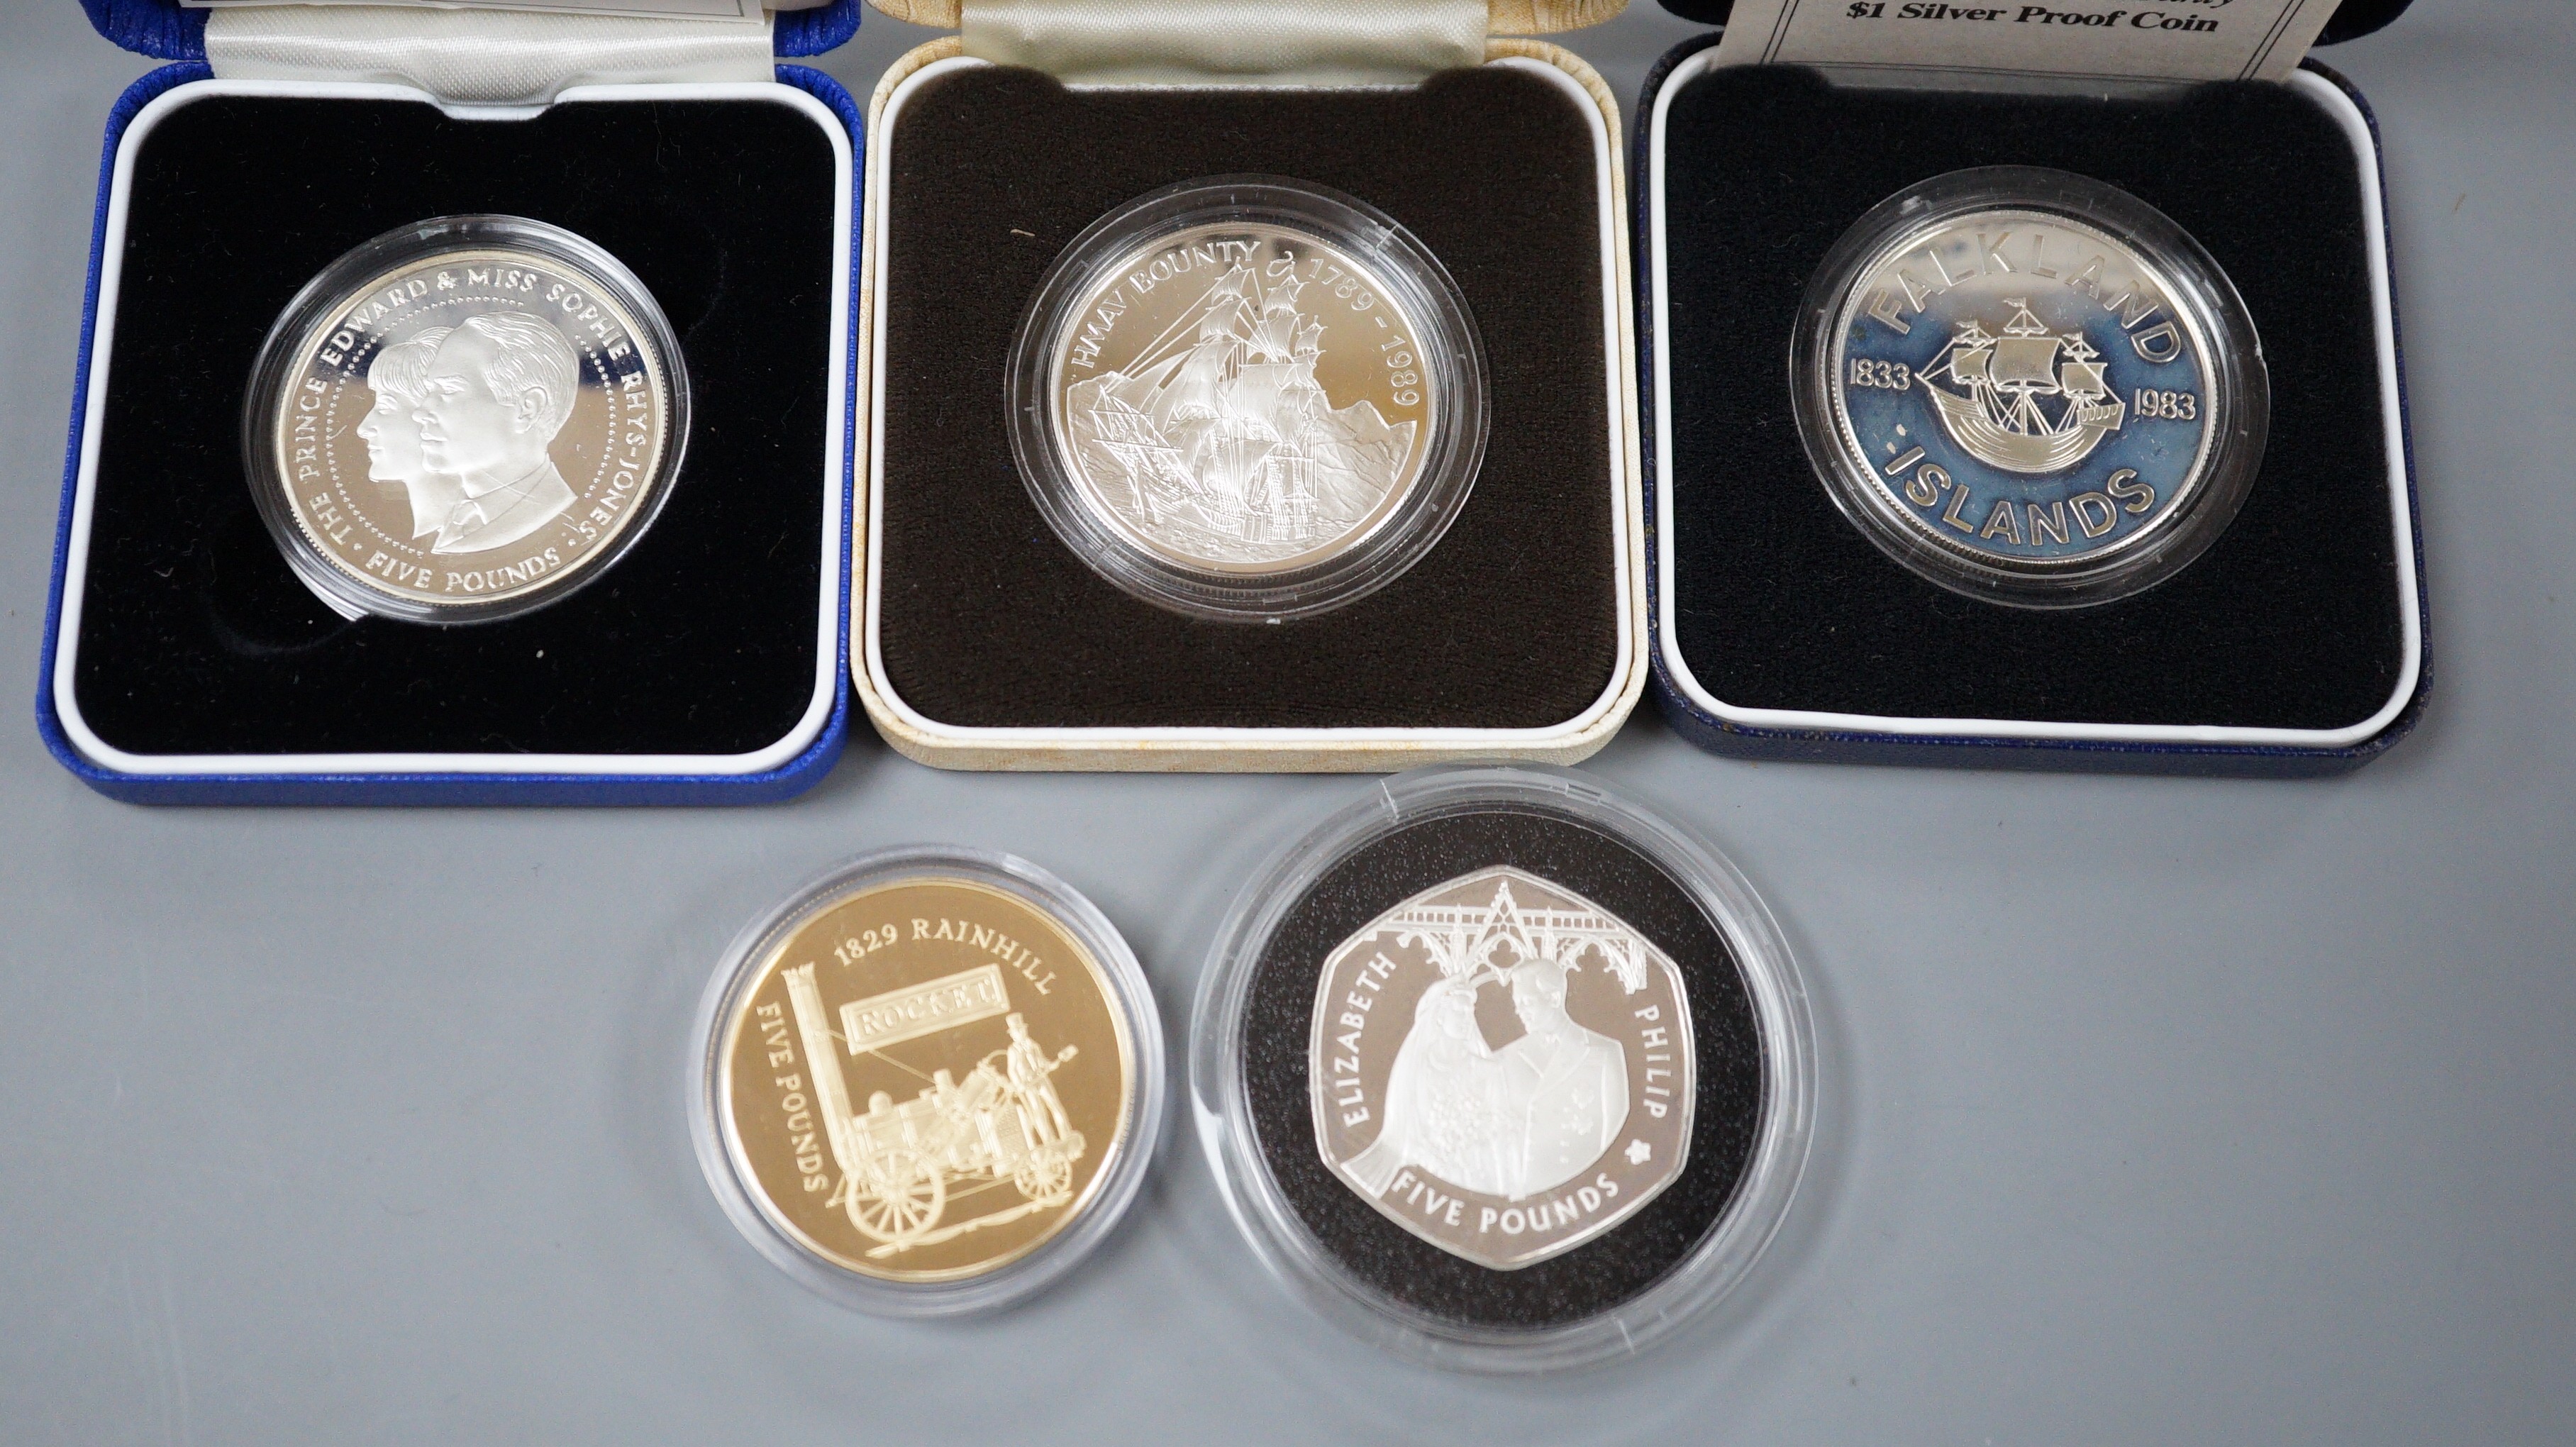 Cased Royal Mint silver proof coins – 2007 Alderney £5, 2006 gilded £5, two 1989 Pitcairn Islands $1 and 1999 Guernsey £5 (5)